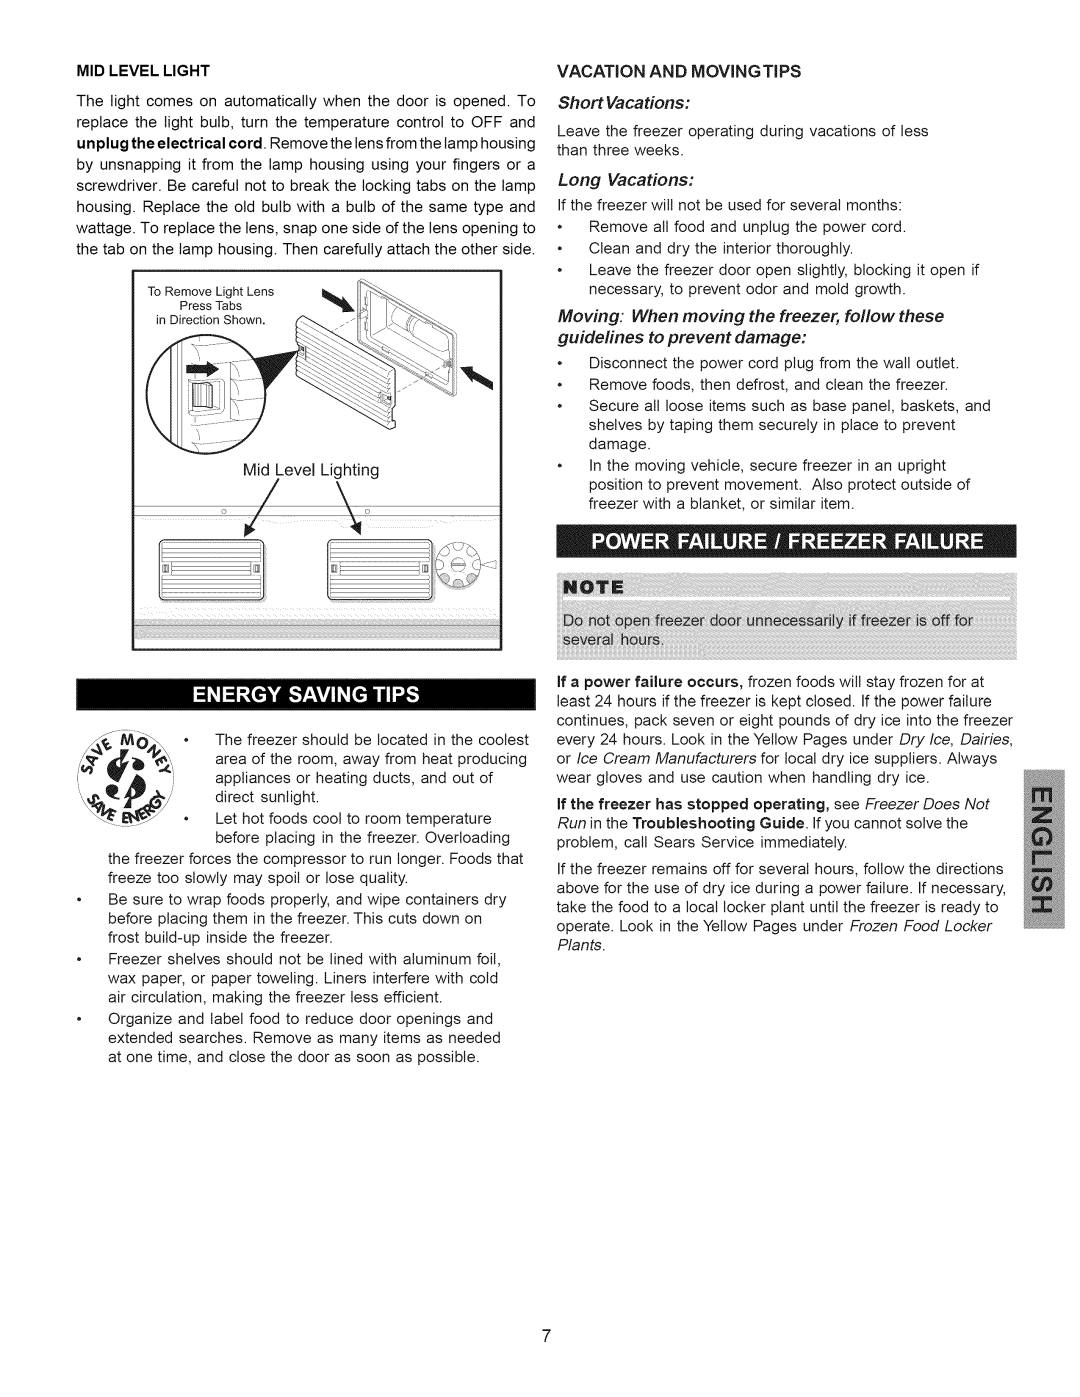 Kenmore 297310600 manual Vacation And Movingtips, Mid Level Light 